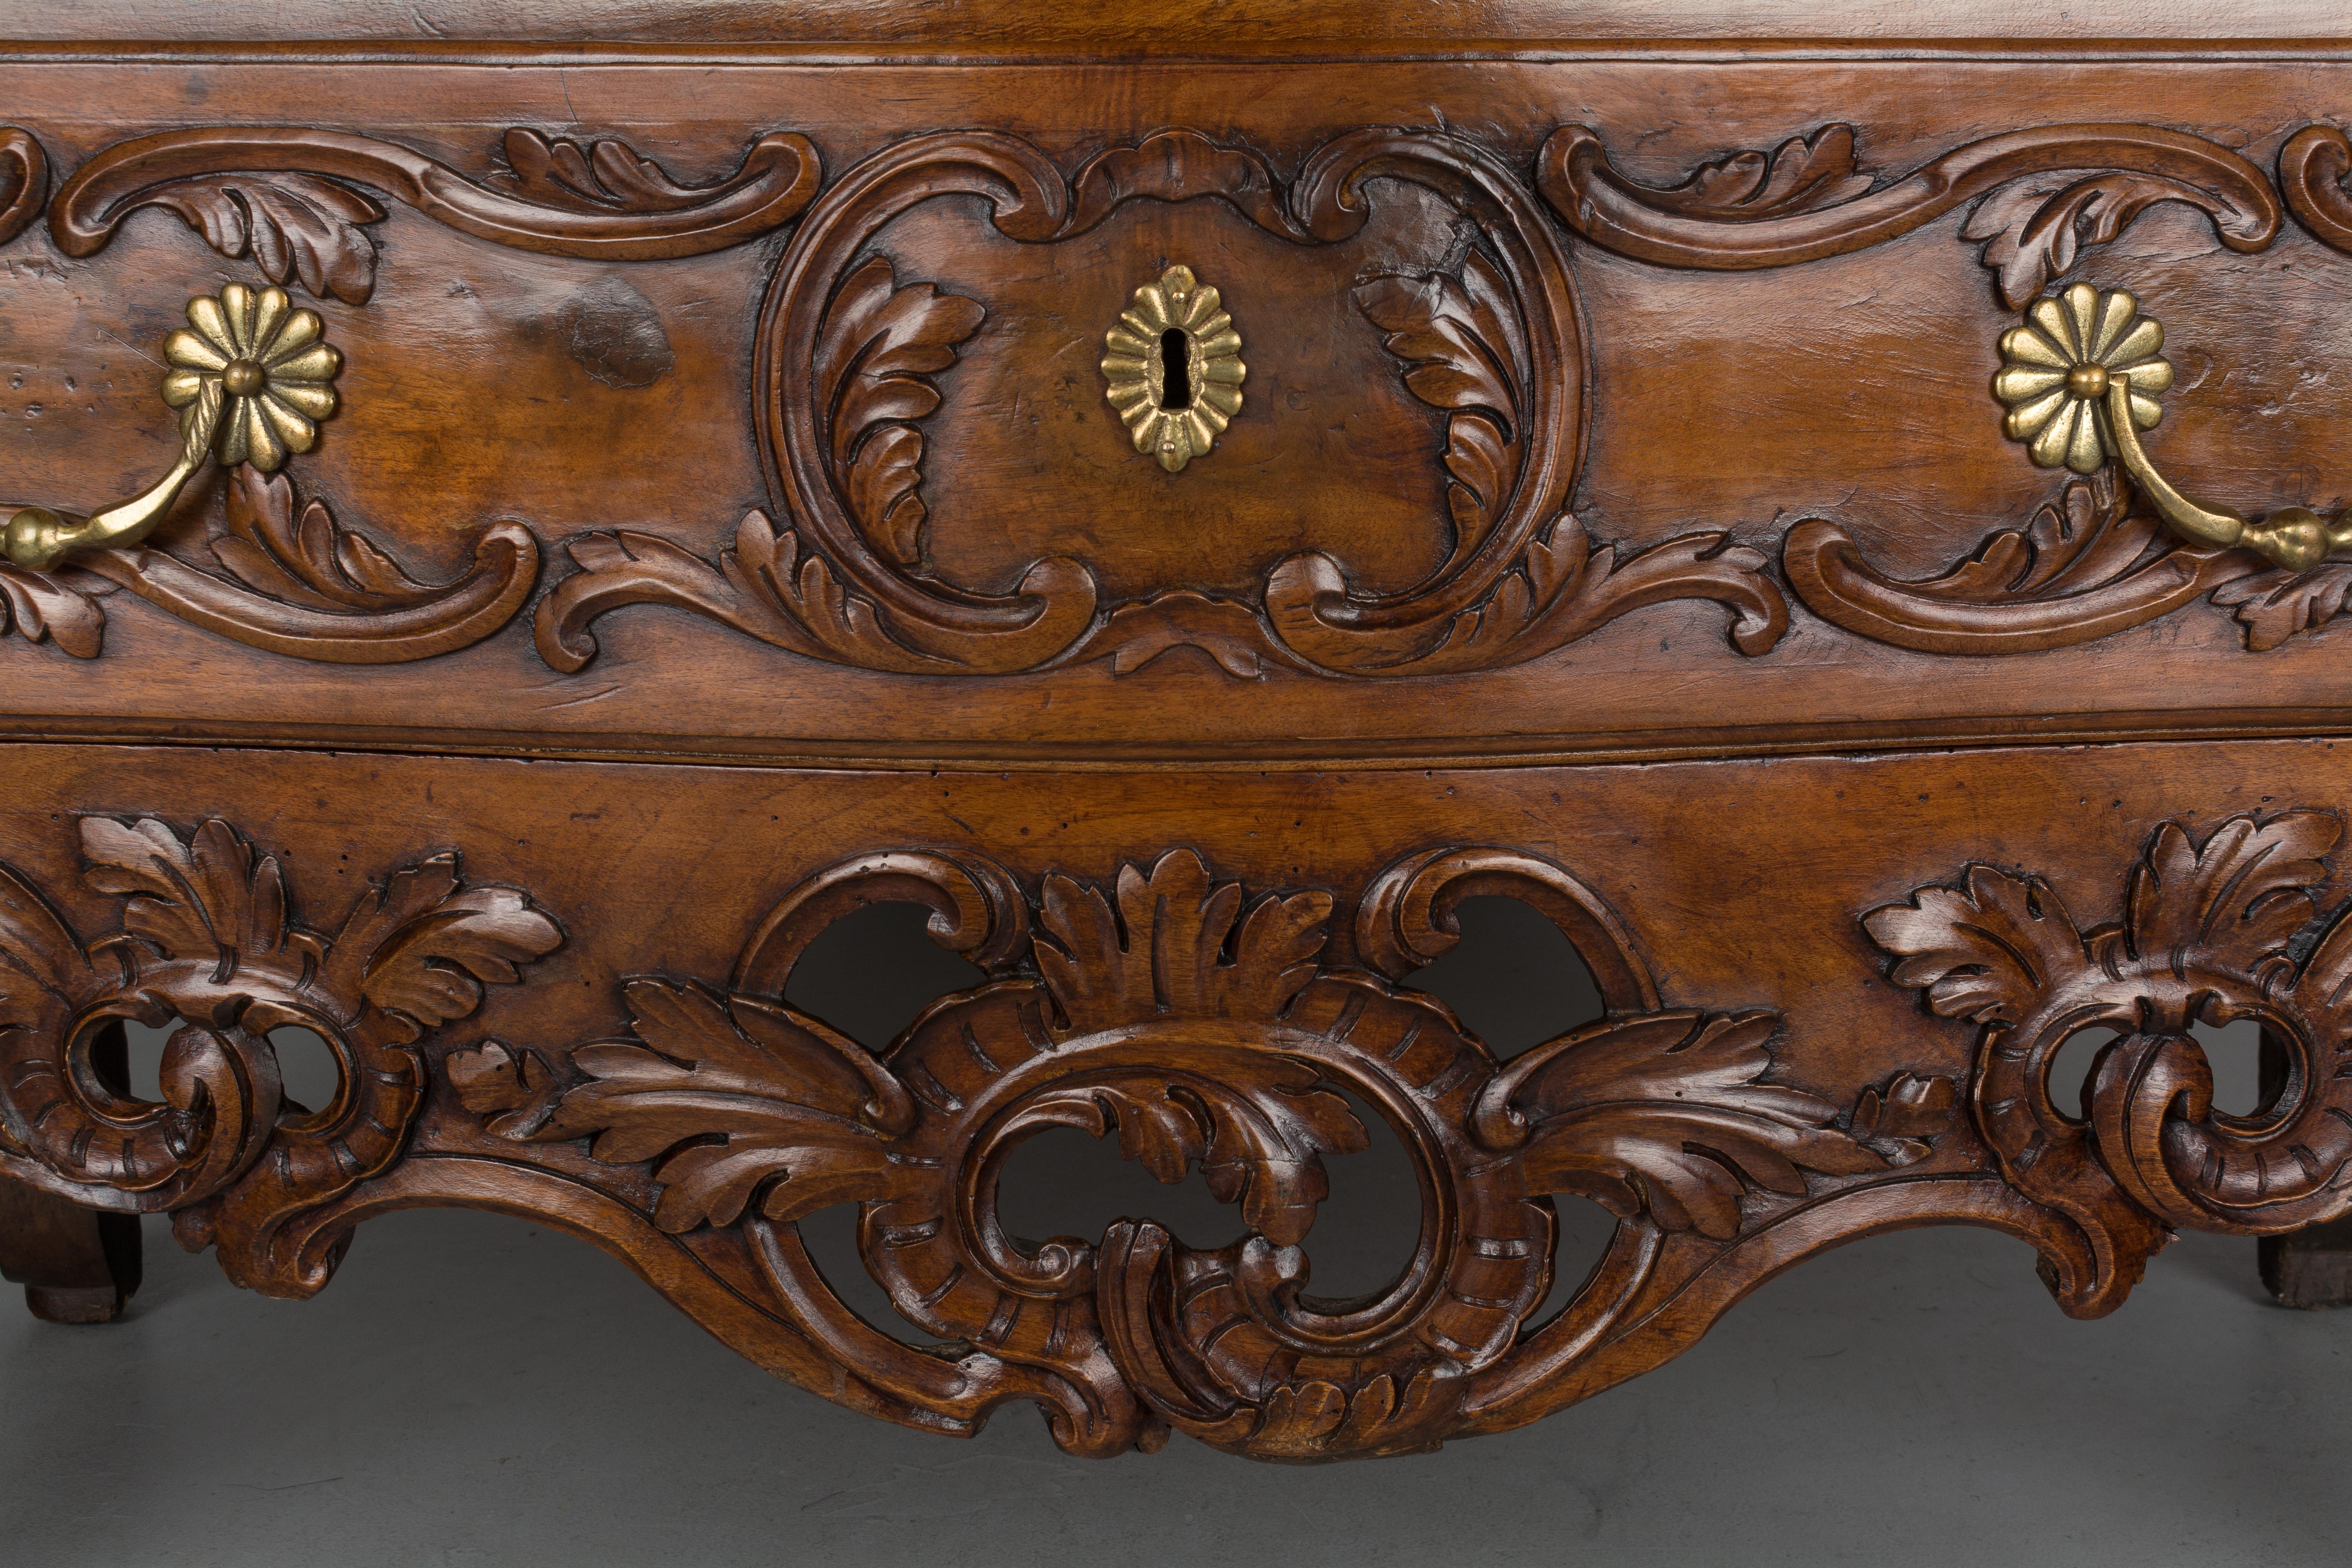 18th Century Louis XV Period Commode or Chest of Drawers (18. Jahrhundert)